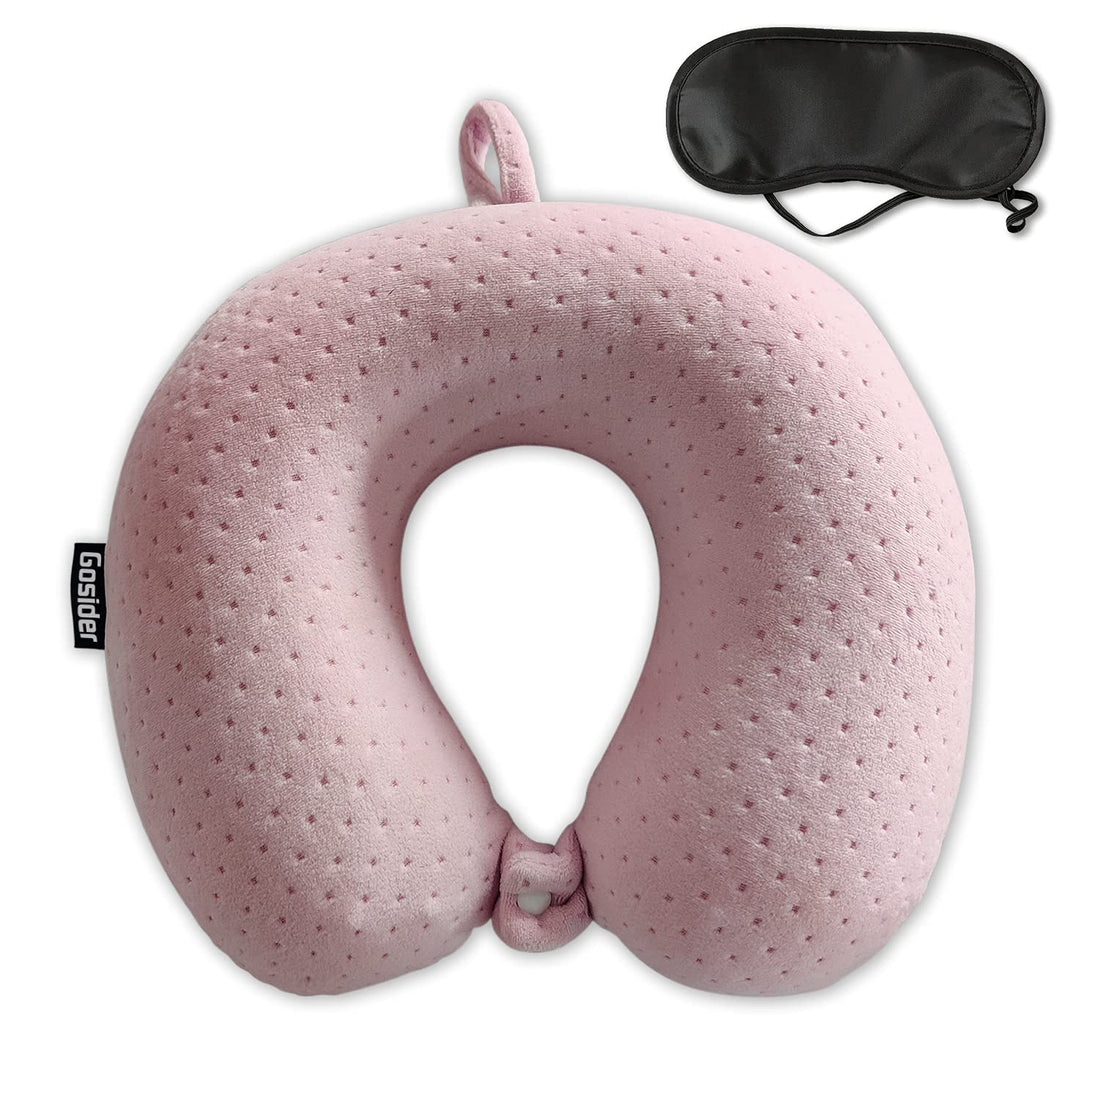 Neck Pillow for Travel - Memory Foam, Comfortable & Breathable Soft U Shaped Pillows Neck & Head Support Relieve Fatigue, Portable U Pillows for Air Travel, Machine Washable (Pink)